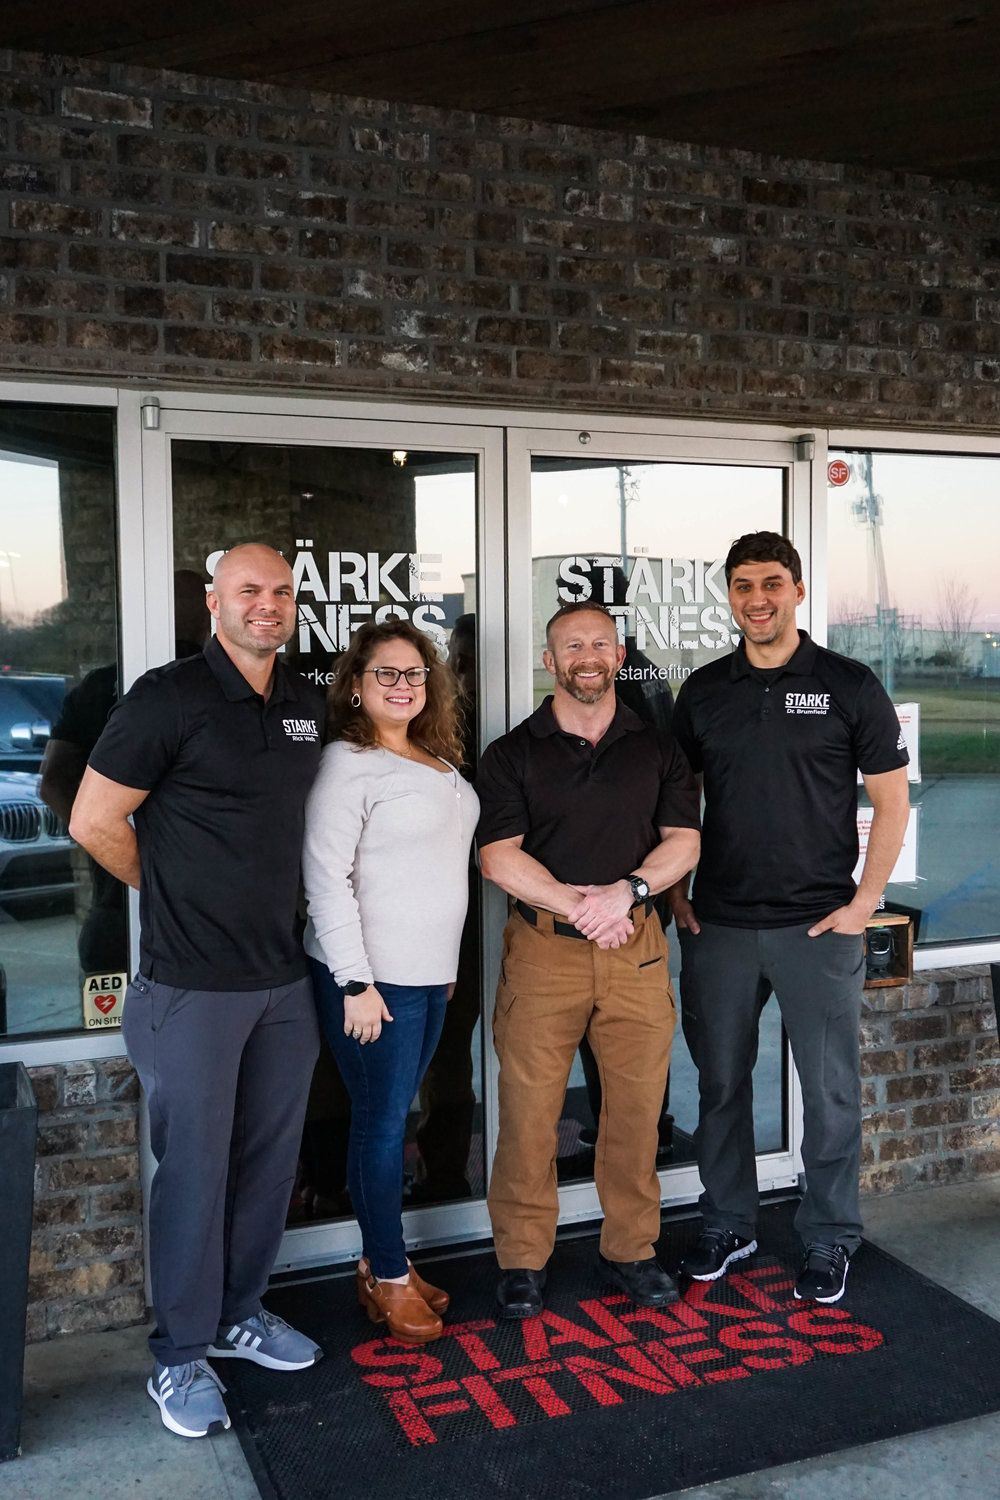 Owners and staff members of Starke Fitness and Wellness pose outside of the facility. Pictured, from left: Rick Wells, Meagan Wells, CEO and co-founder, Charlie Scoggins vice president of operations and corporate memberships, and Justin Brumfield, vice president of marketing and co-founder.